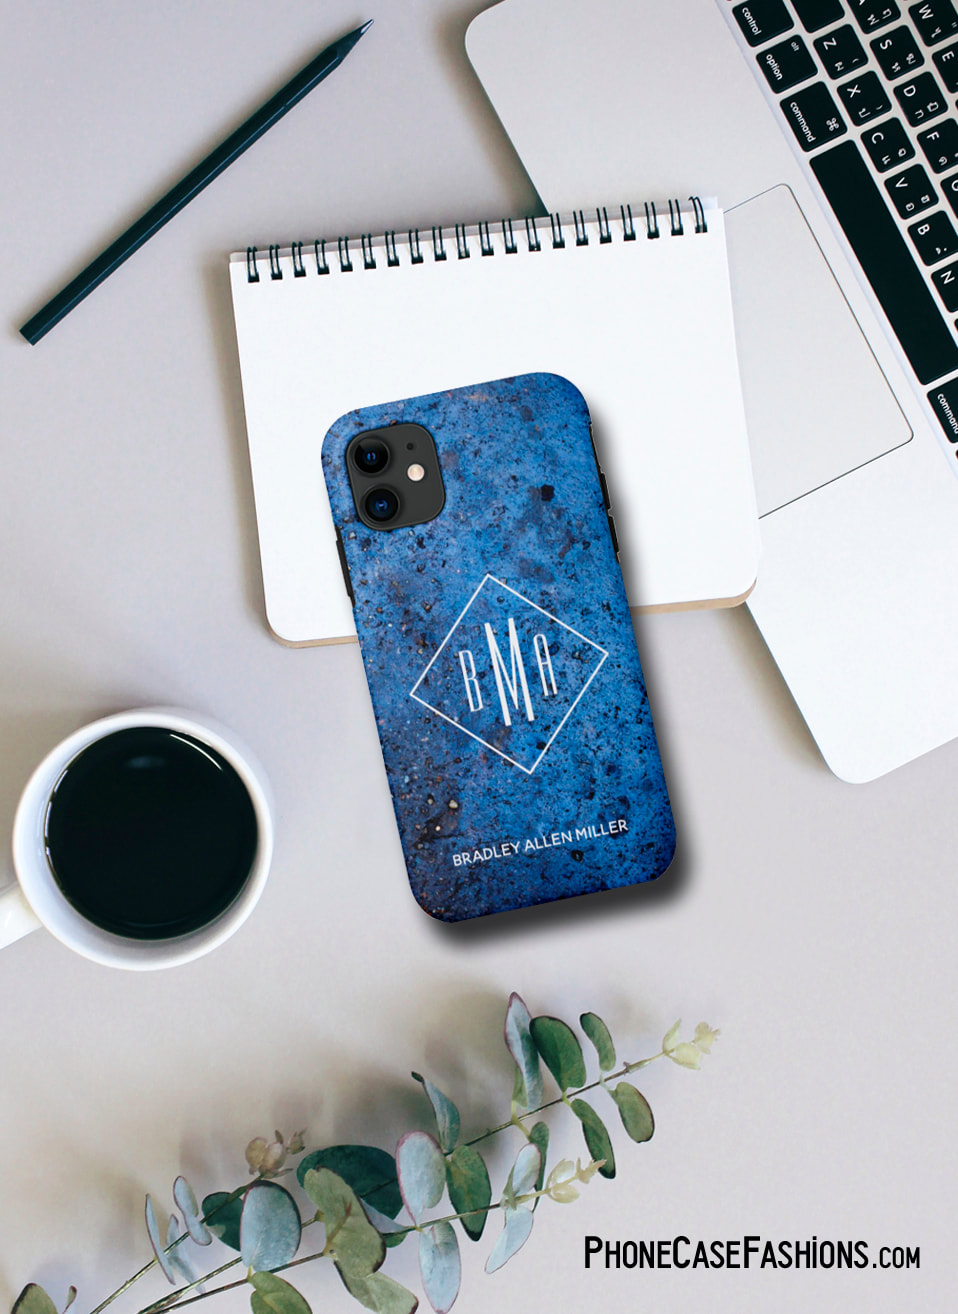 Men now have more choices than a black cell phone case. Our Blue Texture design is cool as is or add our initials, monogram and or your name. Don't hide behind an ugly phone case, design one you'll love.  Shop PhoneCaseFashions.com to design a case you'll love.